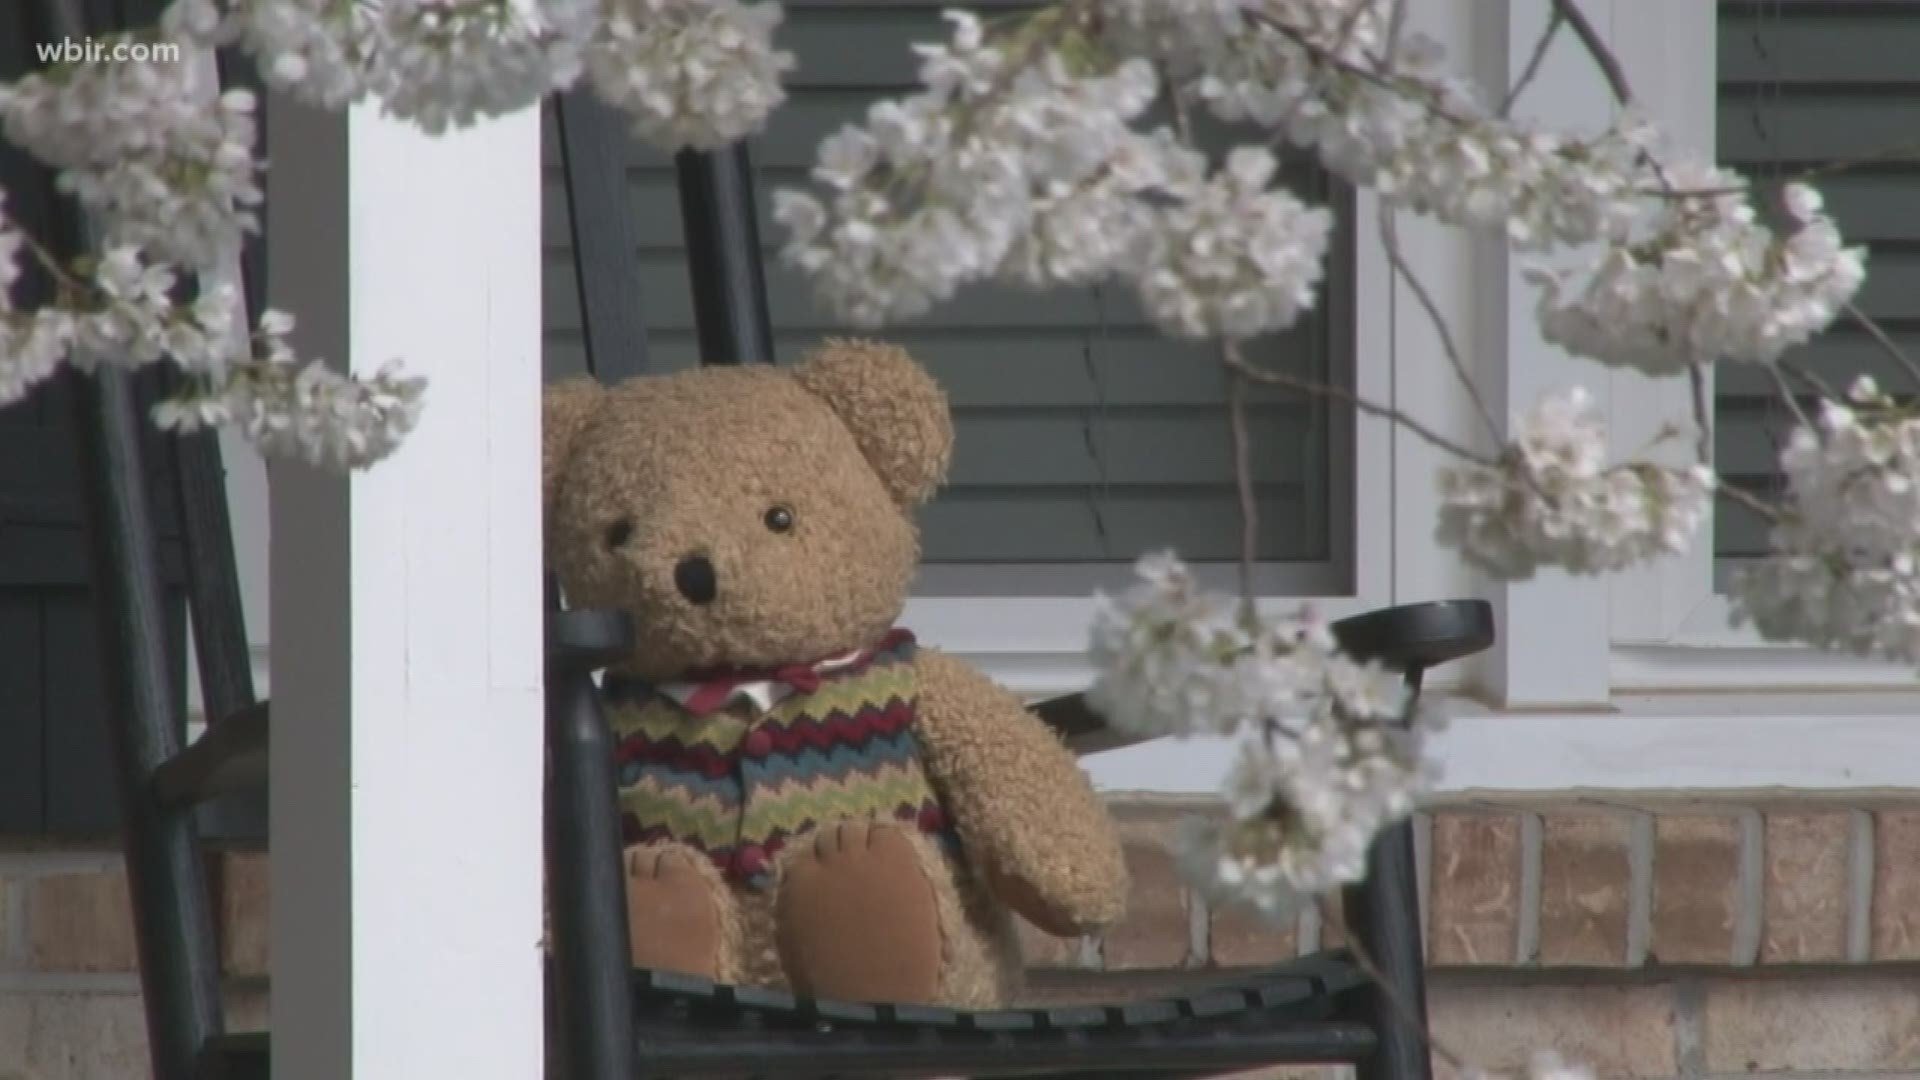 One North Knoxville neighborhood is looking for a light in the midst of a dark time, and it's using teddy bears.